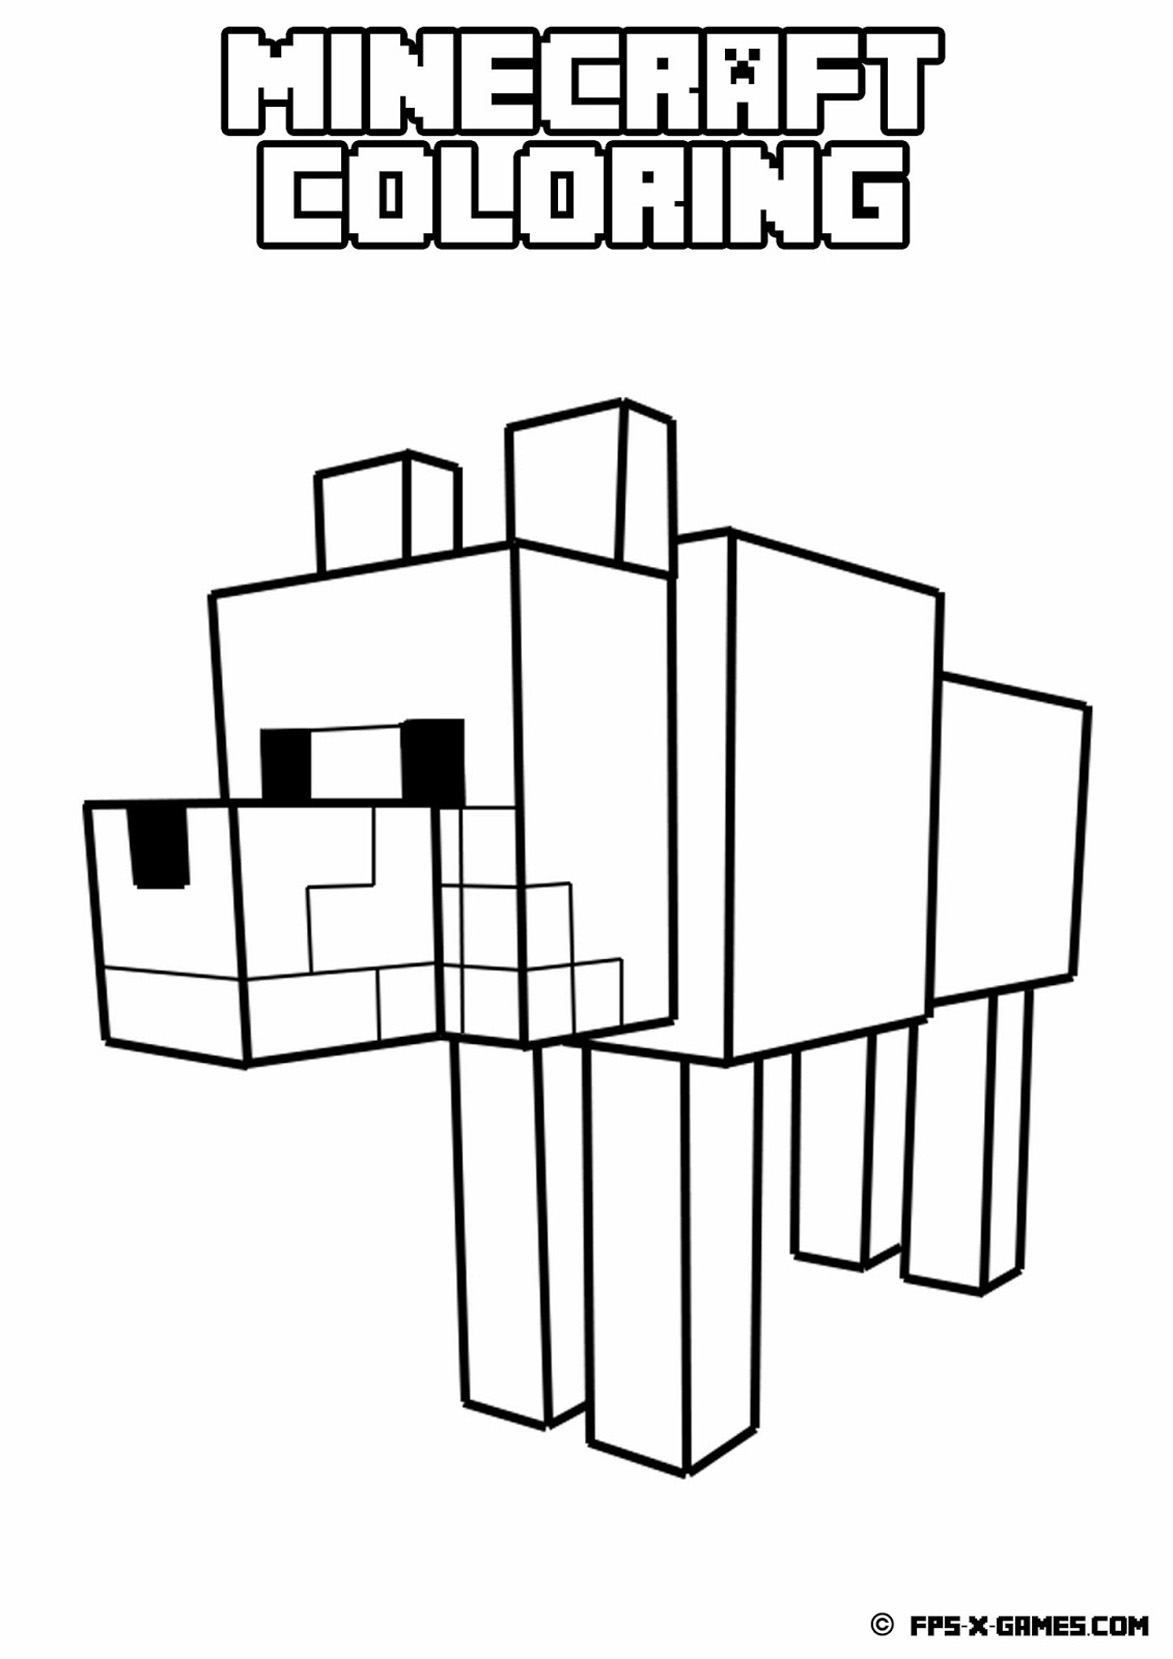 Unique Free Minecraft Coloring Pages |Free coloring on Clipart Library